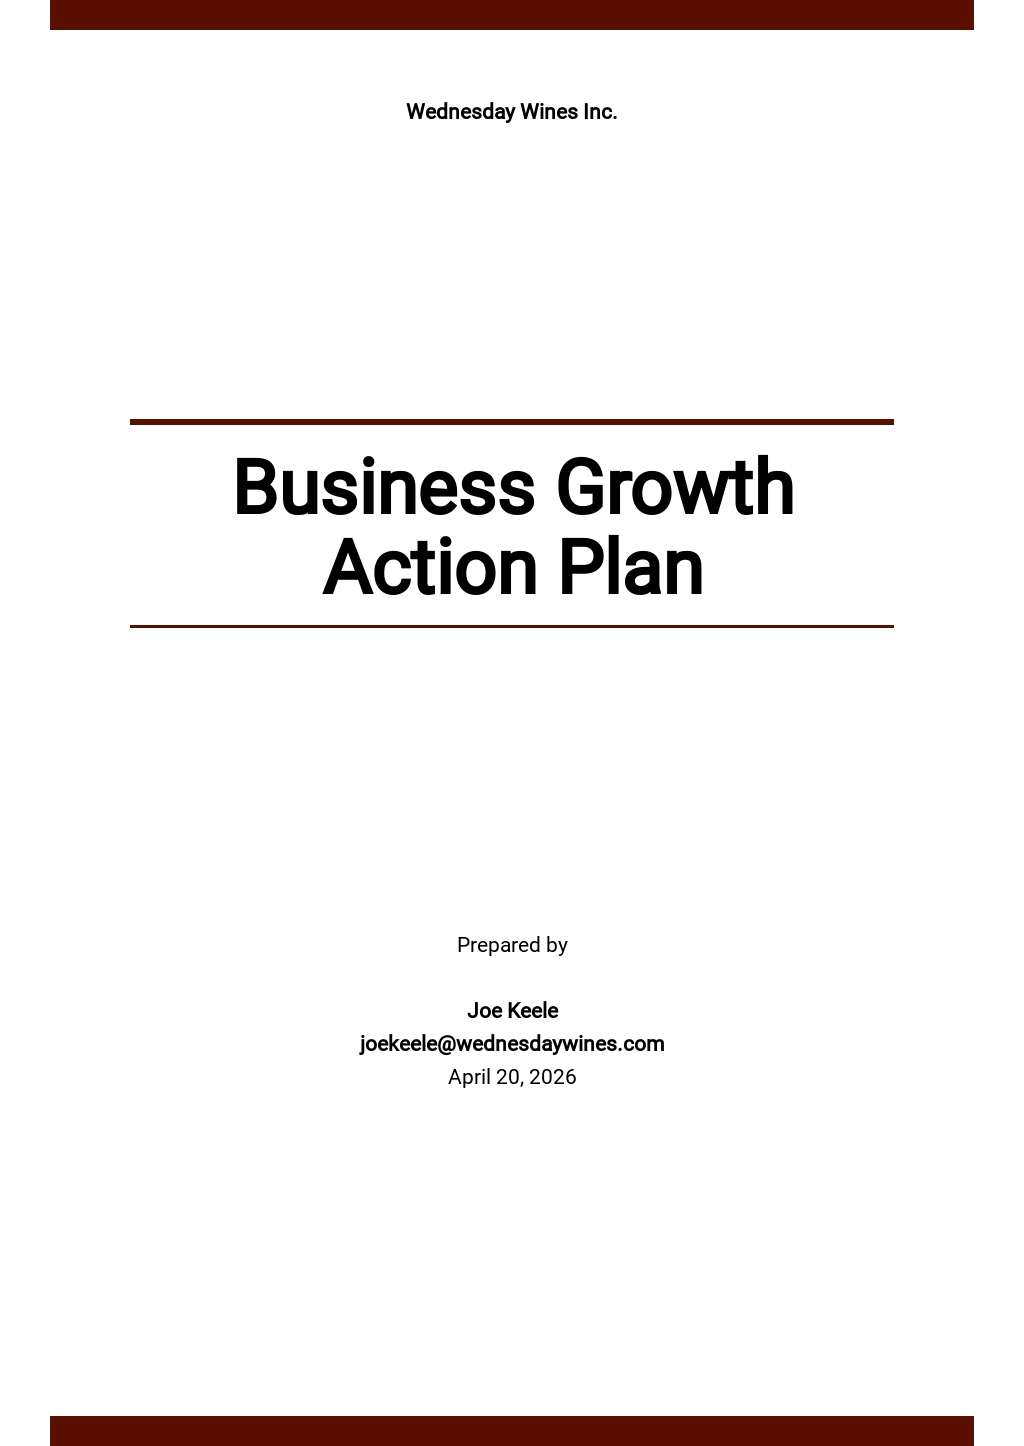 Business Growth Action Plan Template